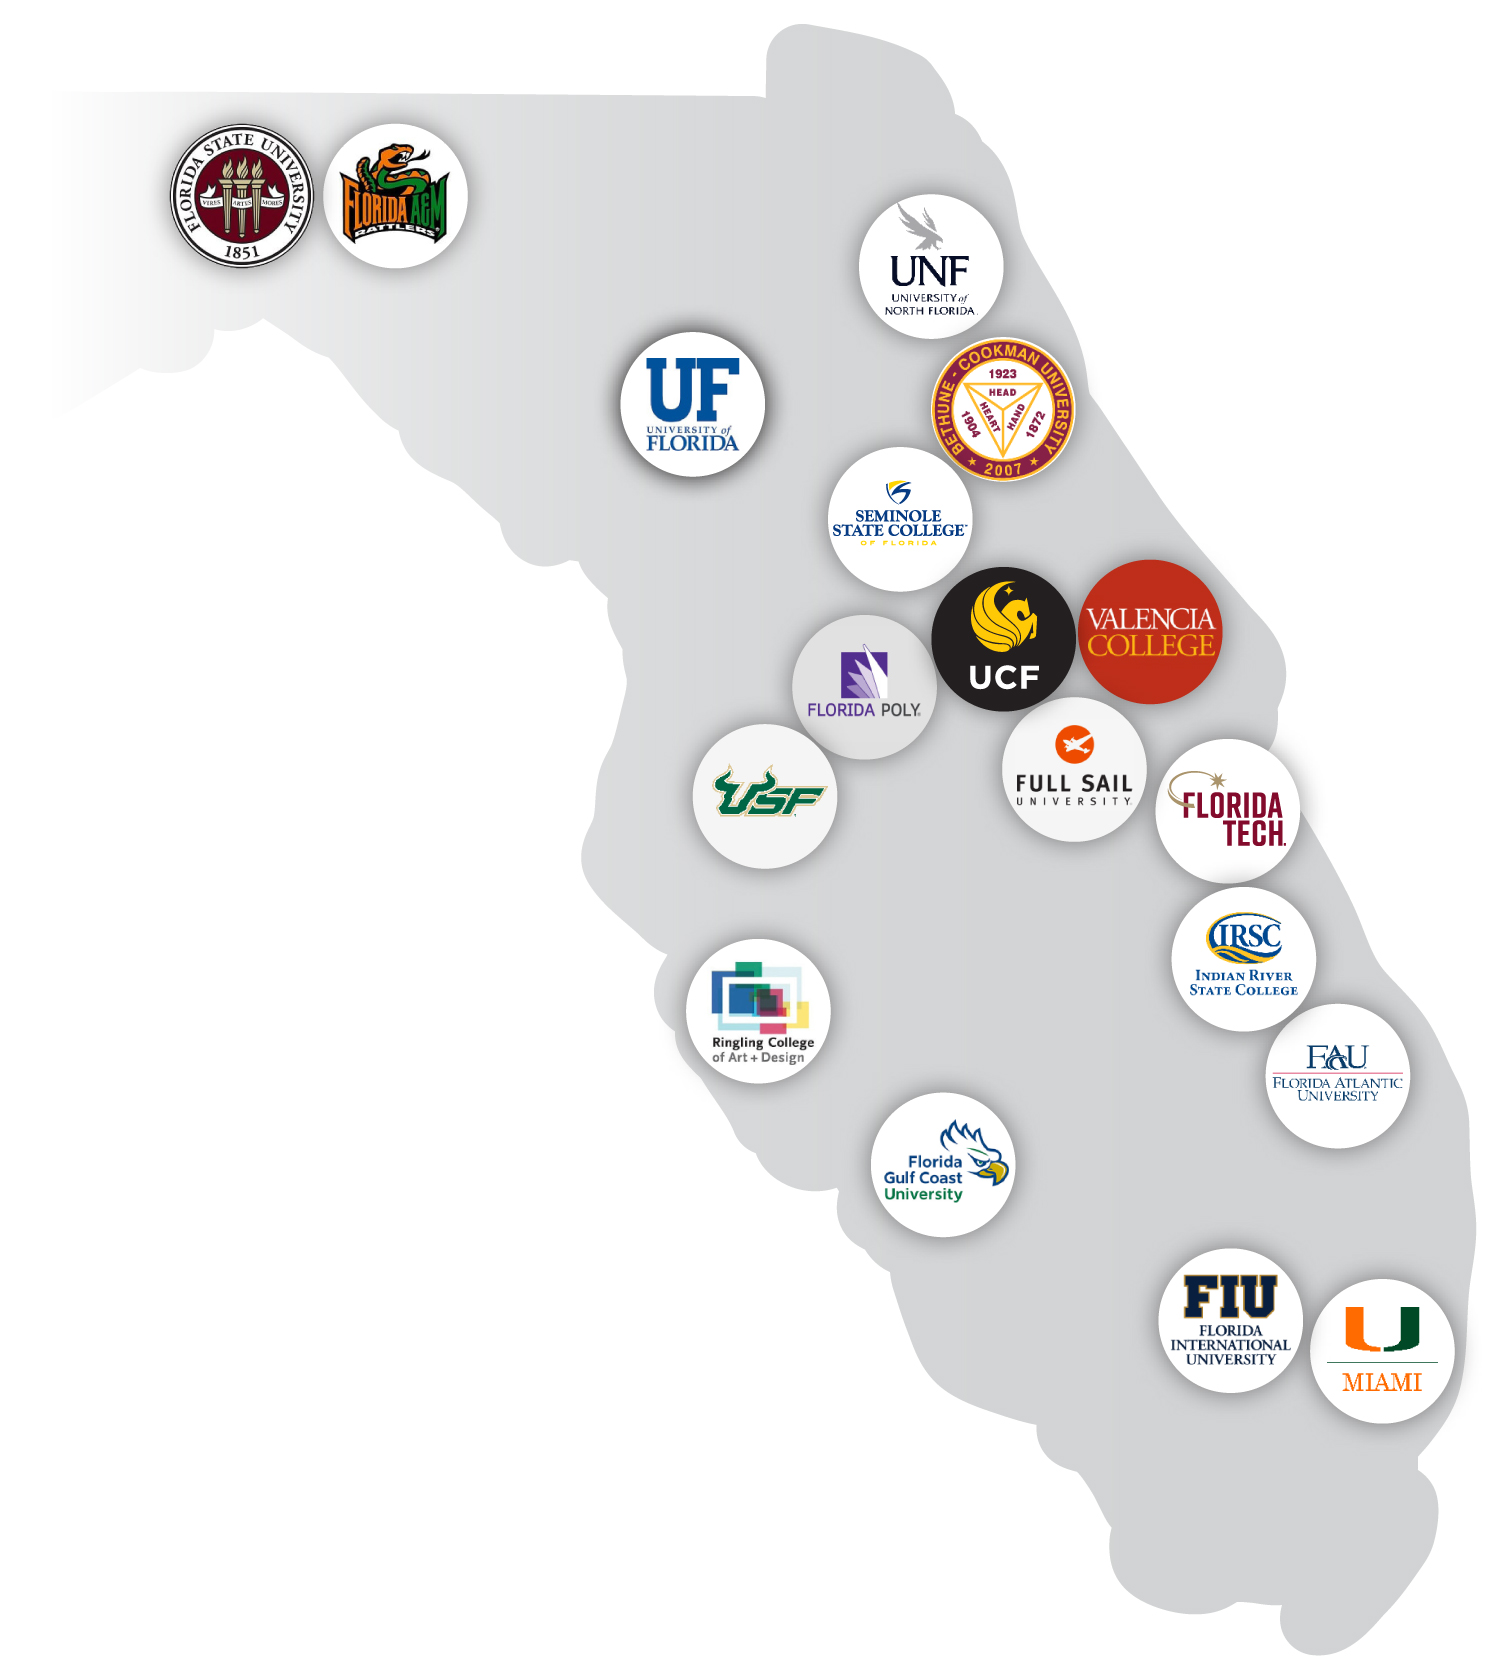 Map of the state of Florida with colleges and universities with game programs listed in circles